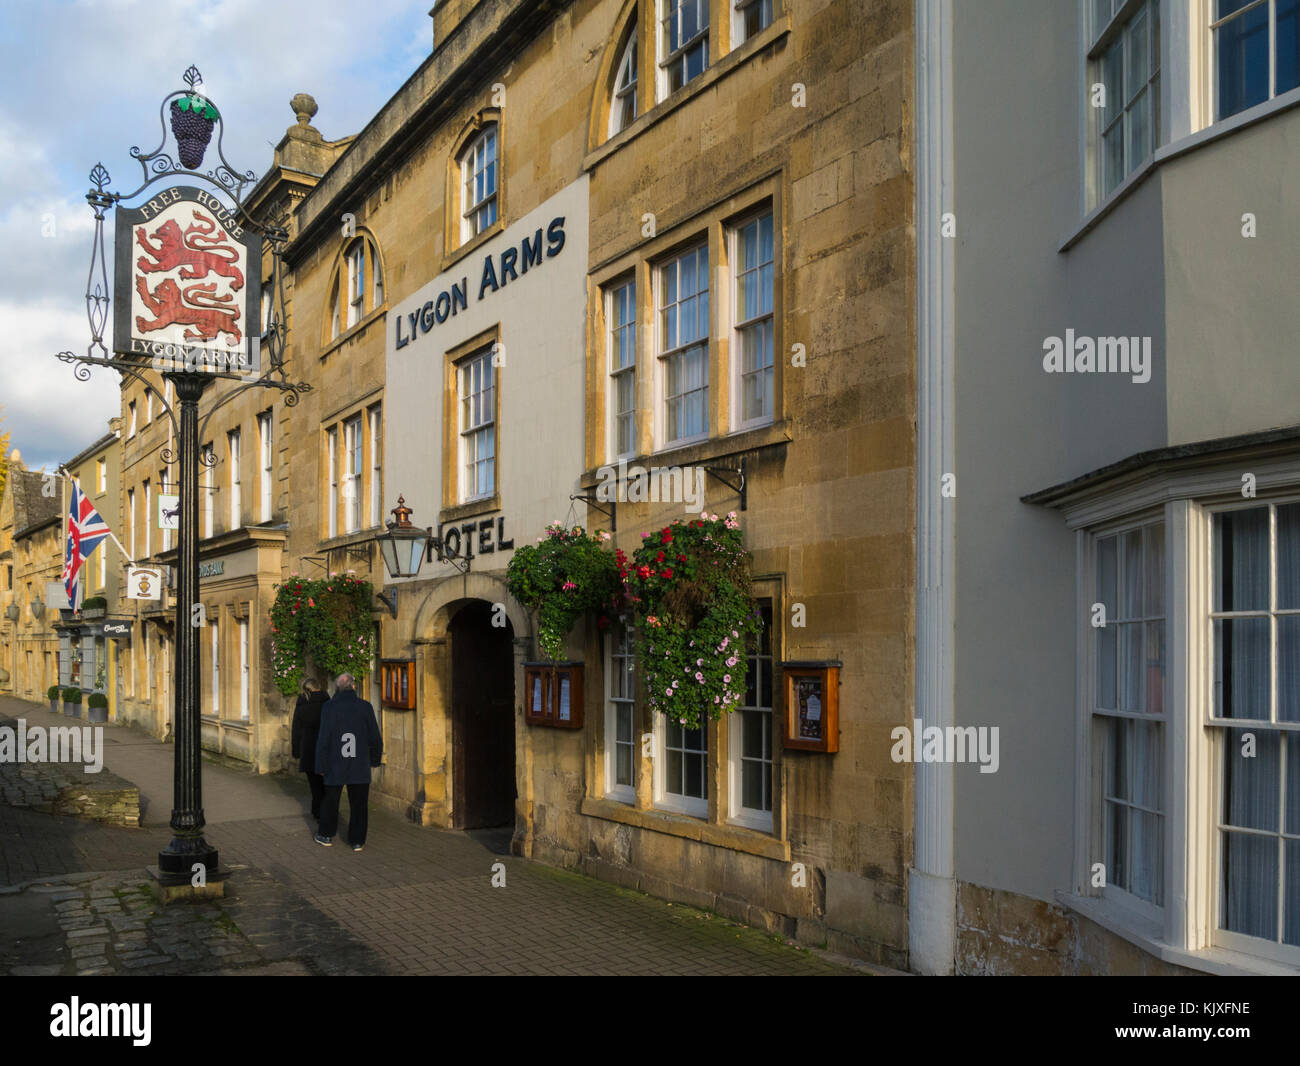 Lygon Arms Hotel High Street Chipping Camden Cotswolds Gloucestershire England UK Stock Photo